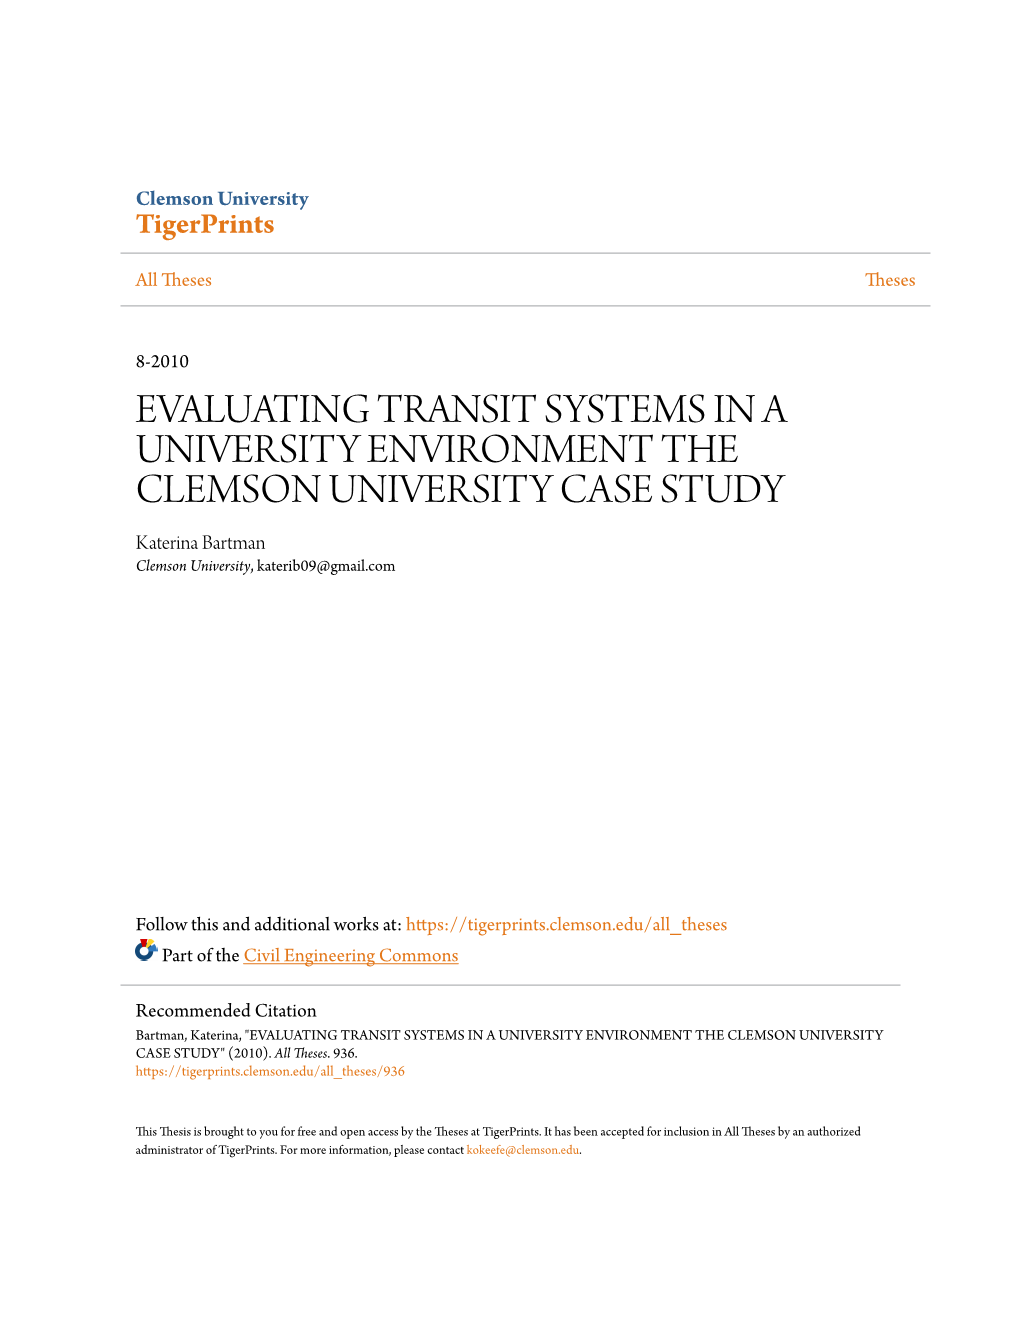 EVALUATING TRANSIT SYSTEMS in a UNIVERSITY ENVIRONMENT the CLEMSON UNIVERSITY CASE STUDY Katerina Bartman Clemson University, Katerib09@Gmail.Com